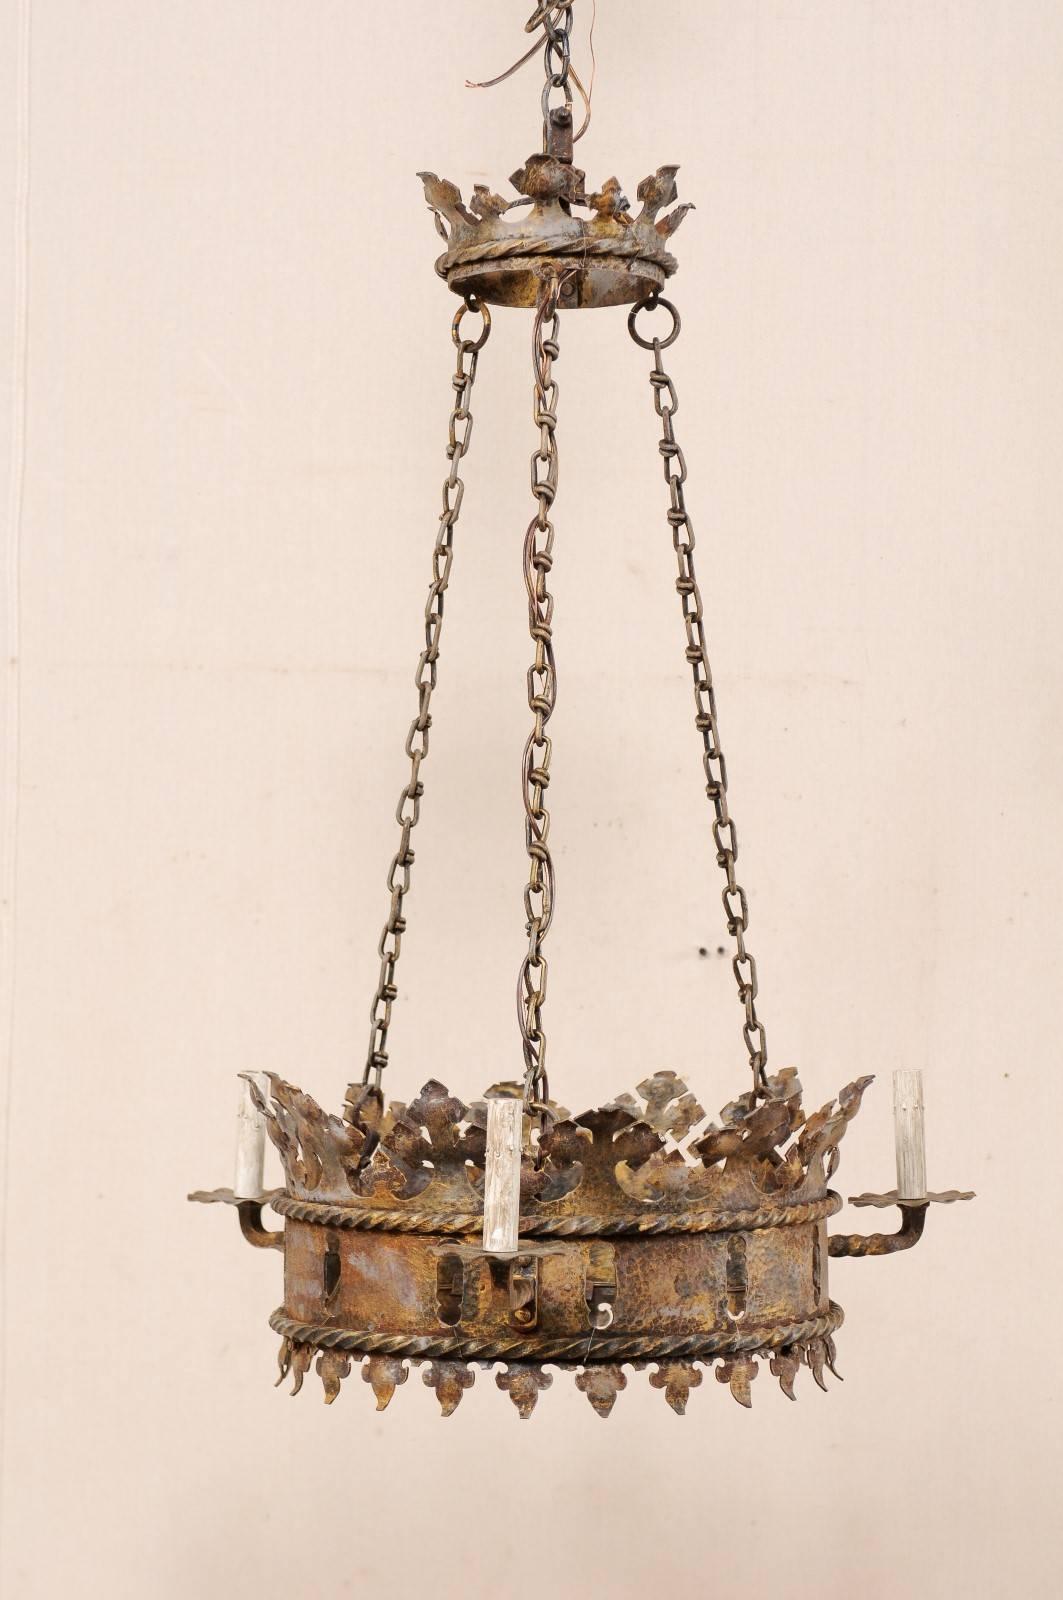 20th Century French Midcentury Ring Shaped Iron Crown Chandelier with Gold Accents